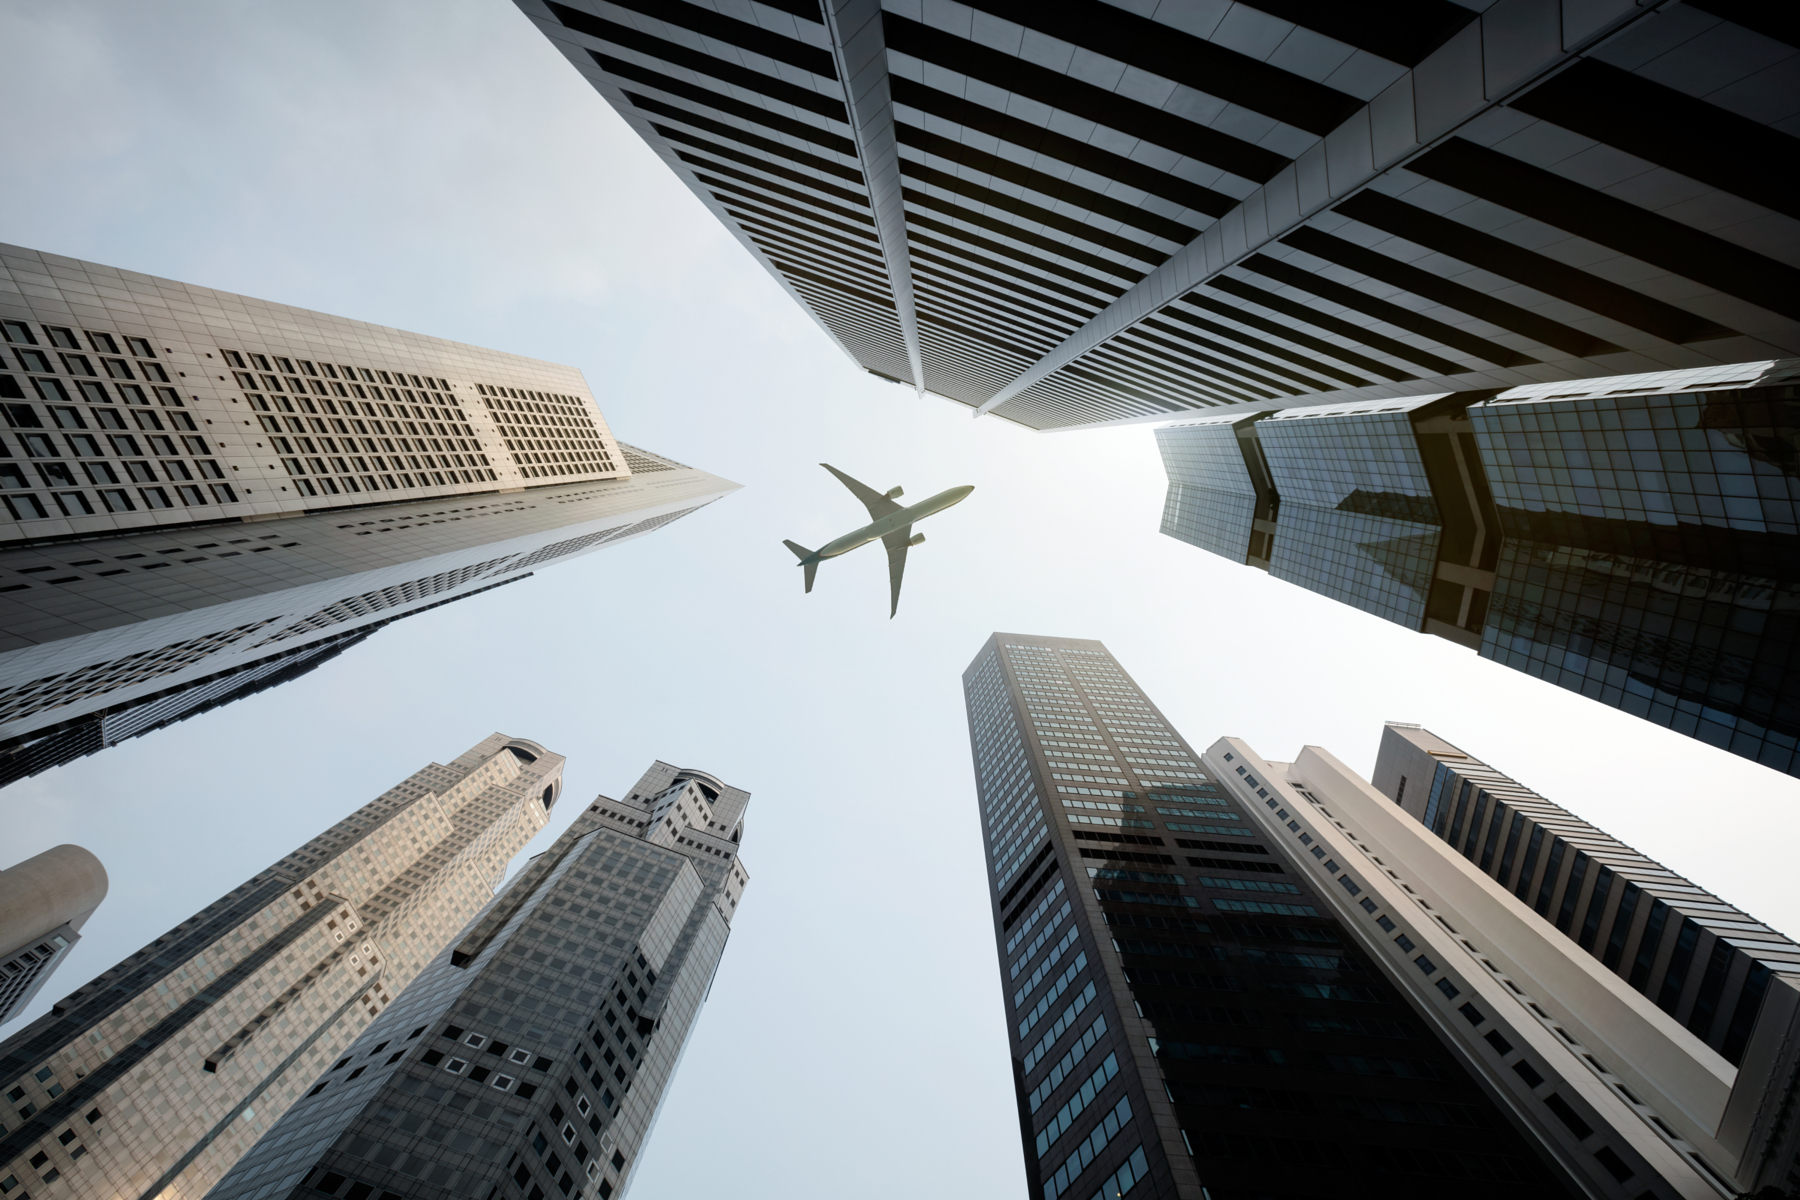 Px photo id tall city buildings and a plane flying overhead